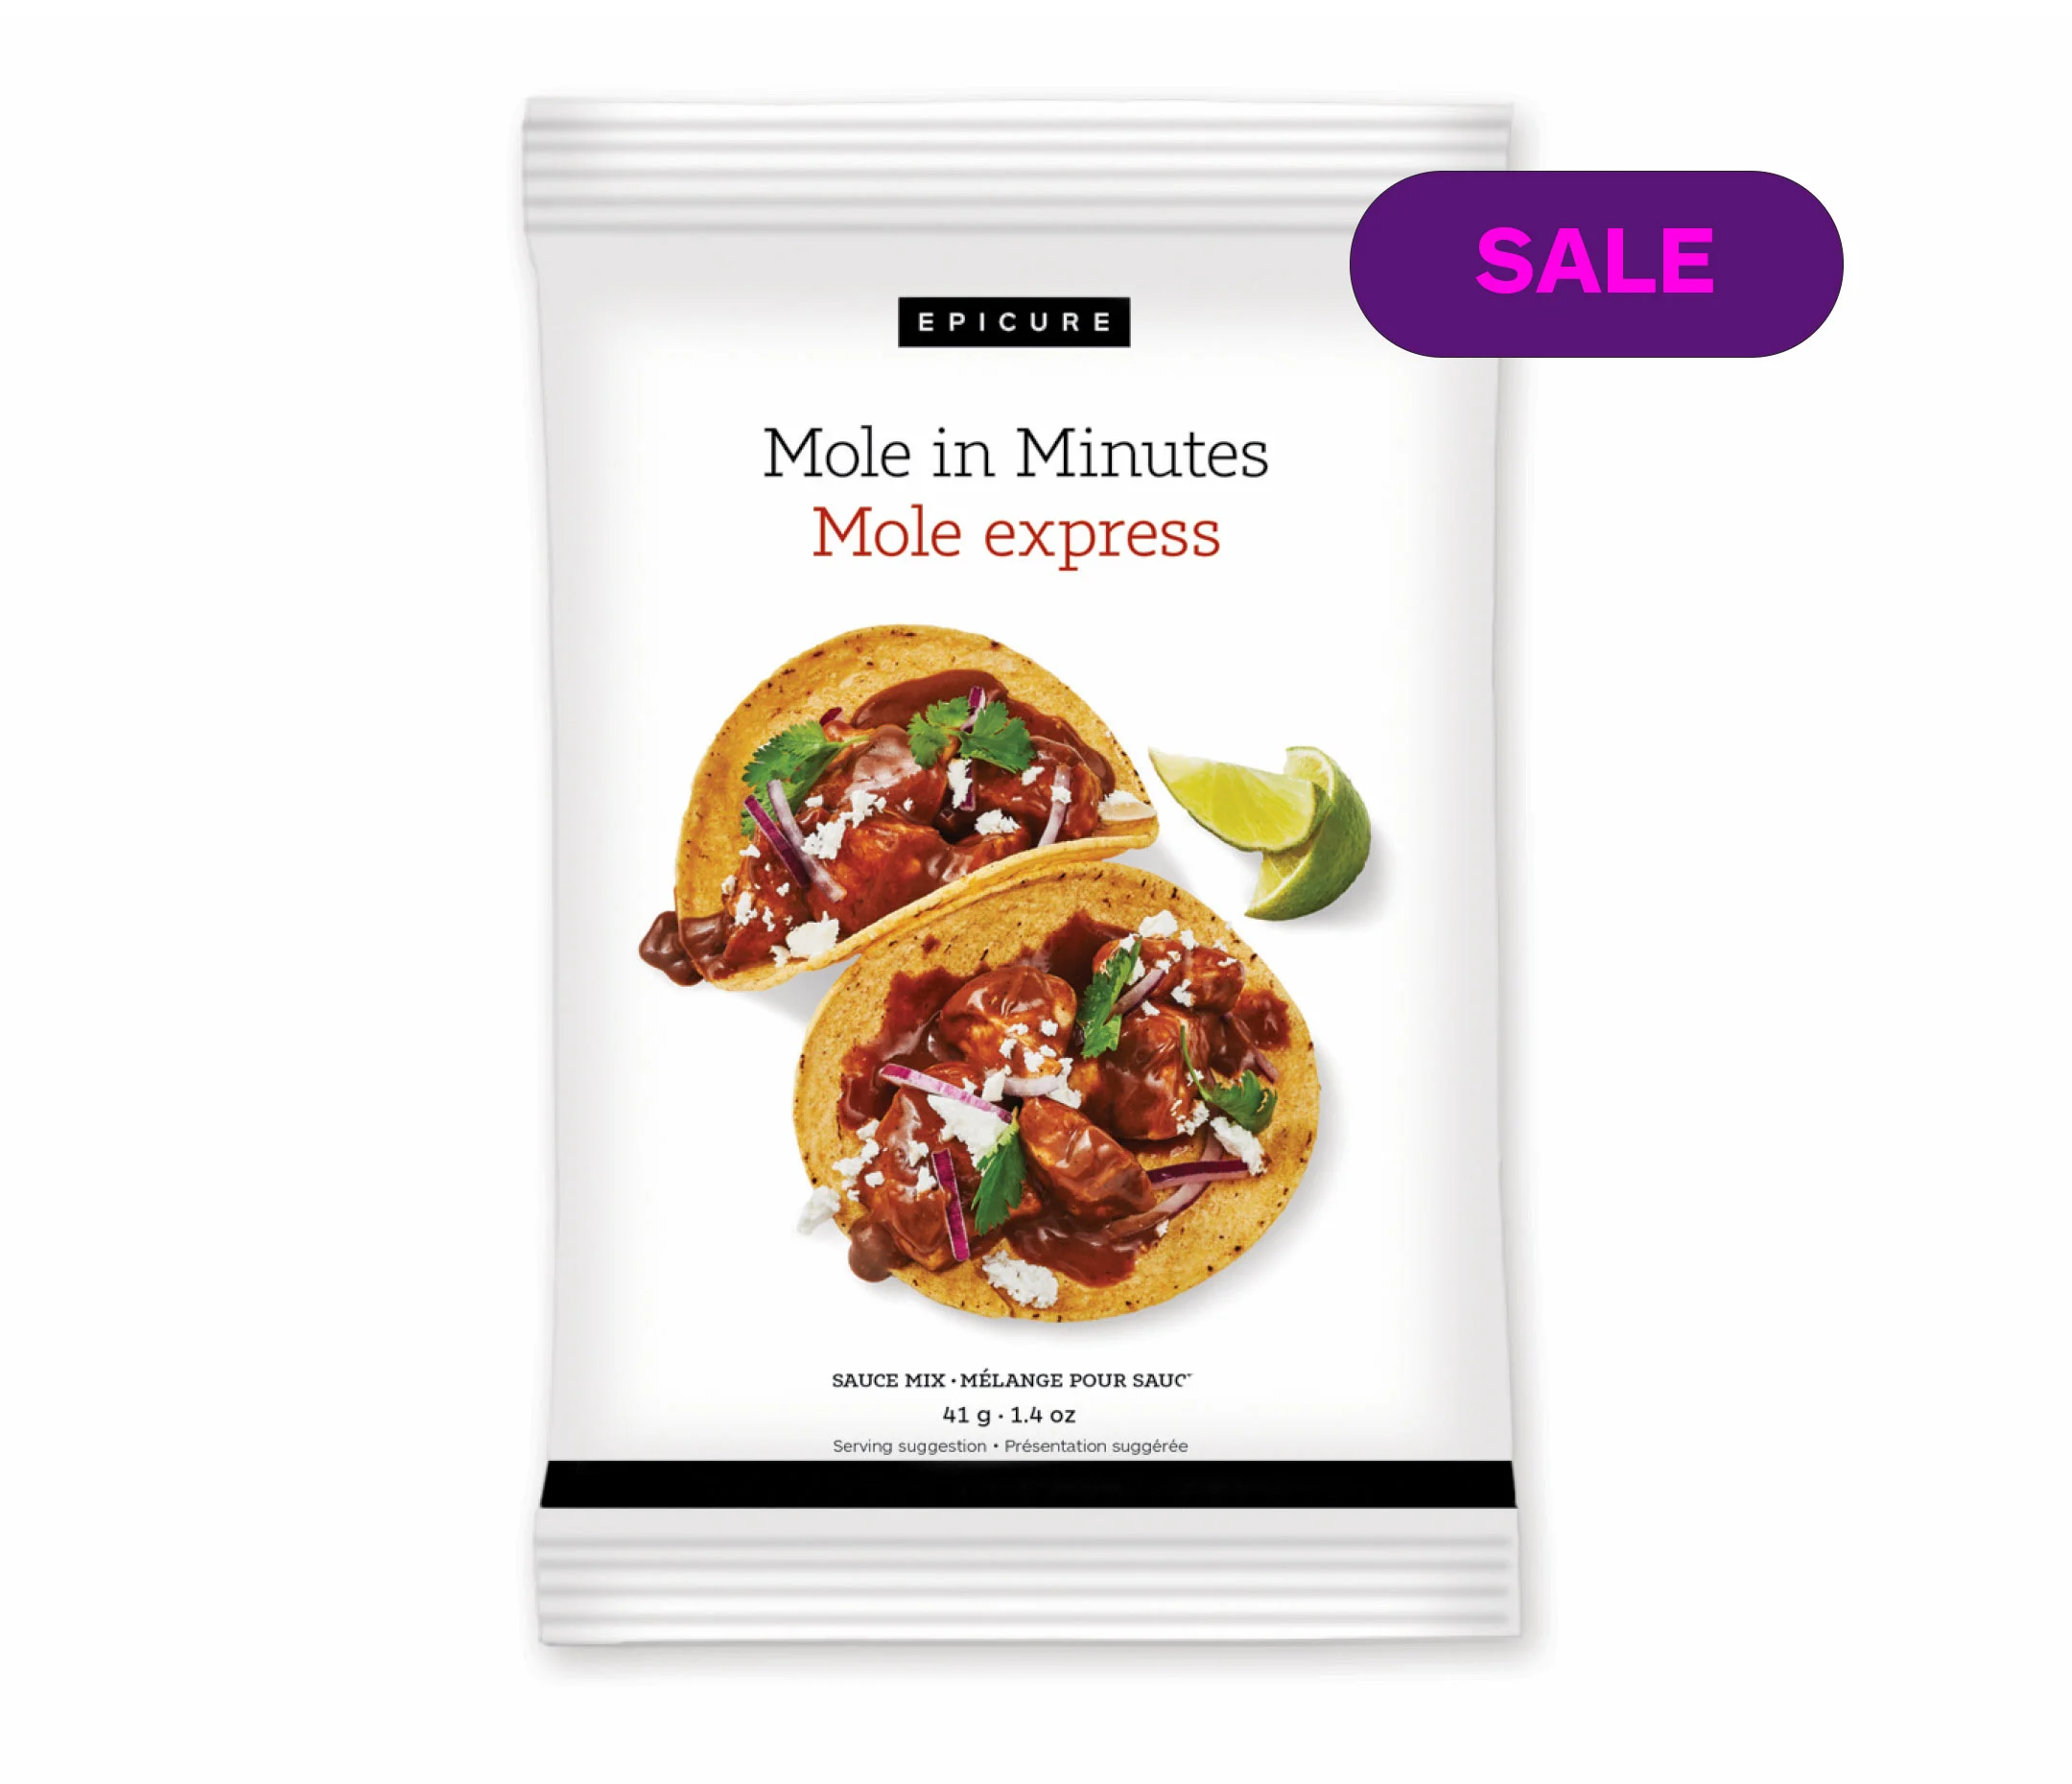 Mole in Minutes Sauce Mix (3pk)